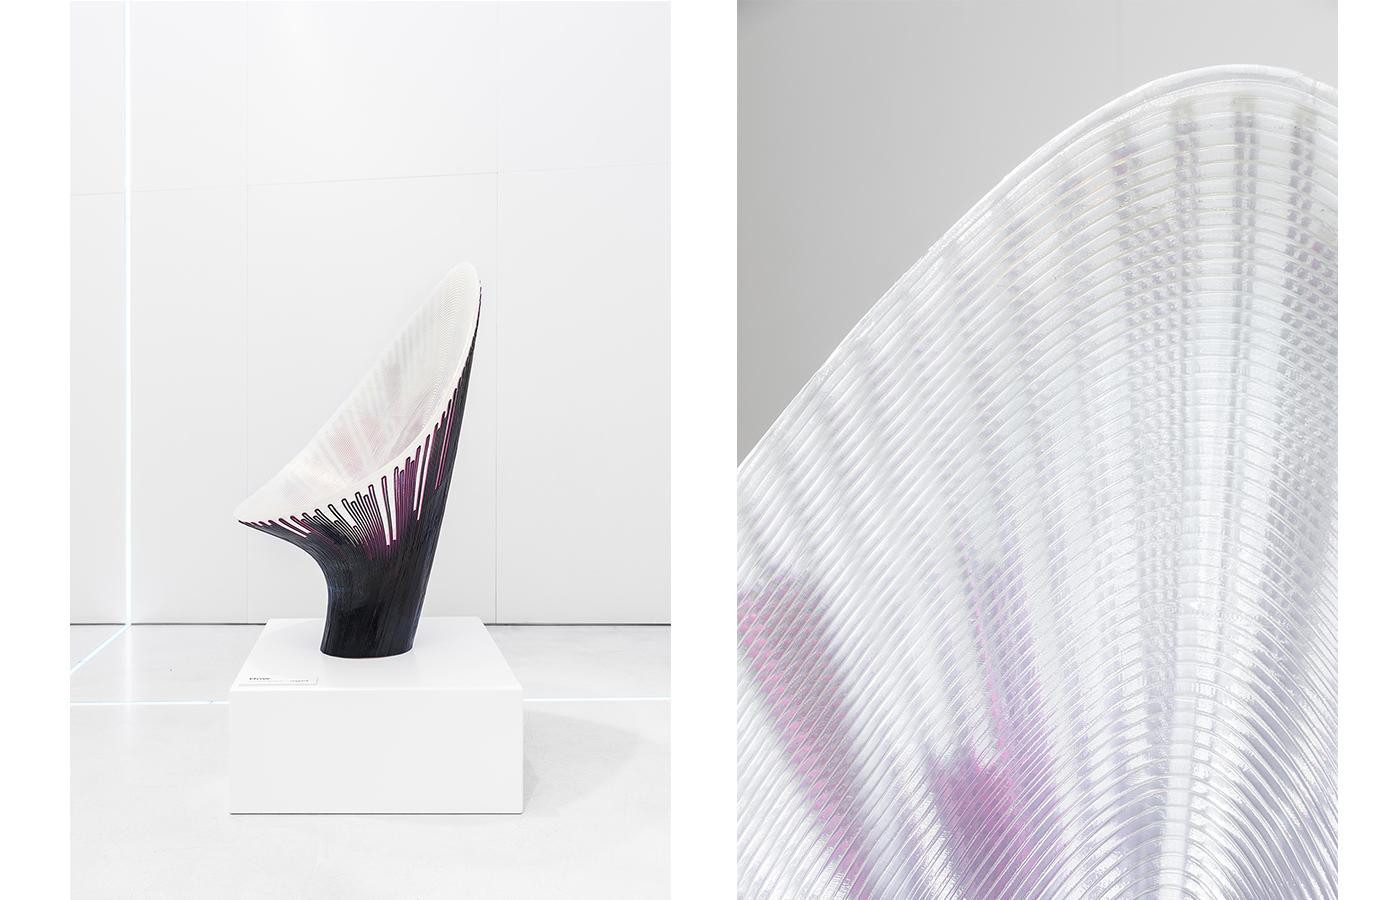 zaha hadid vase of zaha hadid gallery london design festival with bow and rise 3d printed chairs a zaha hadid architects for nagami a photograph delfino sisto legnani marco cappelletti